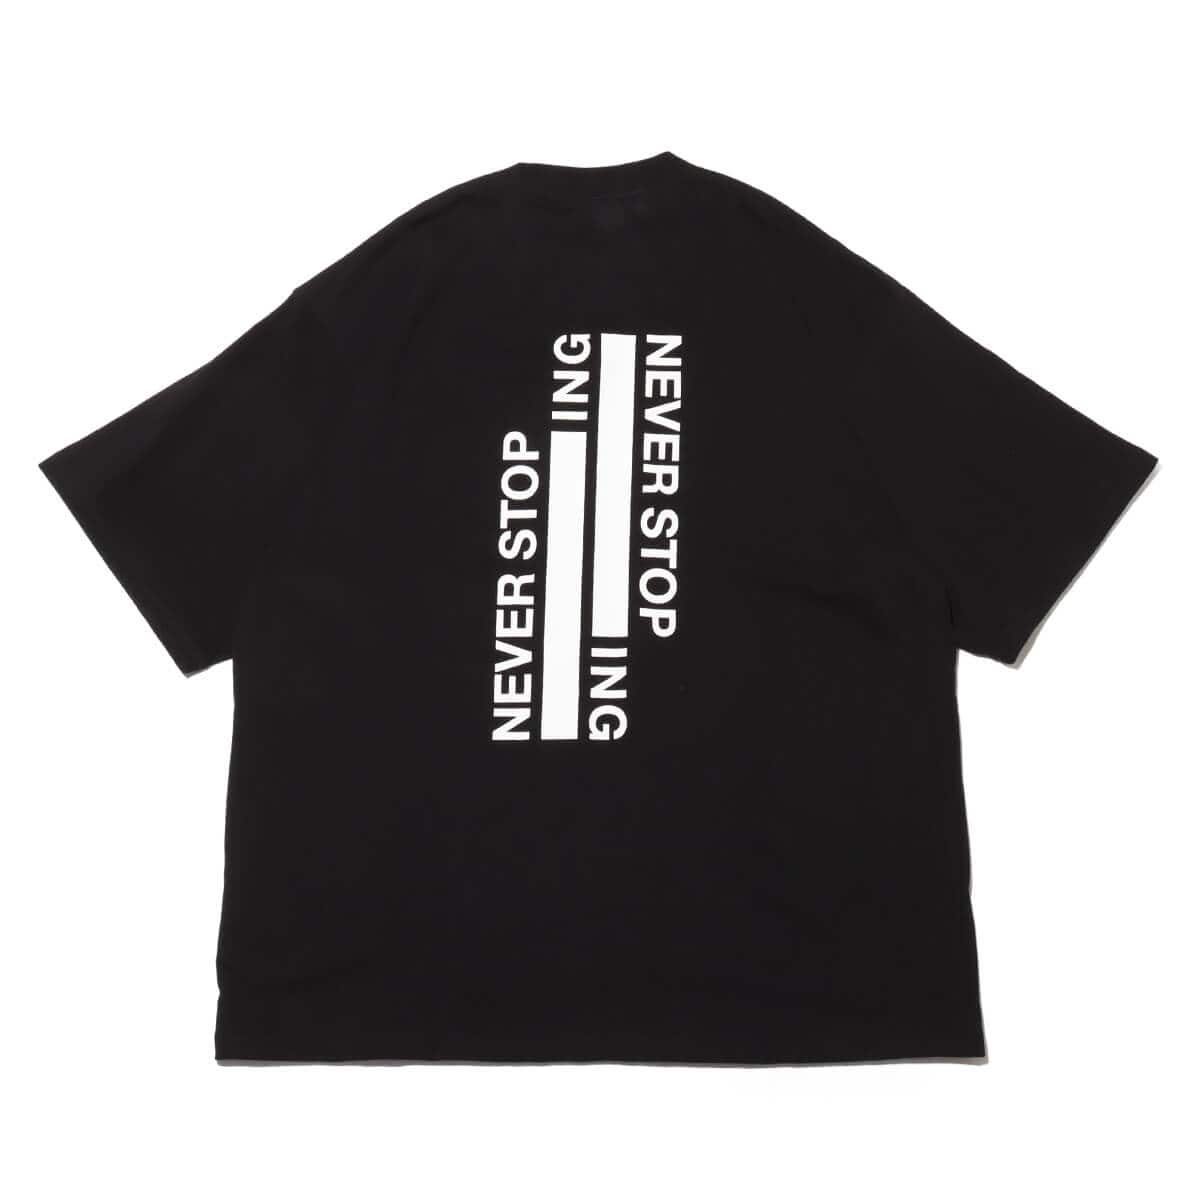 THE NORTH FACE S/S NEVER STOP ING Tee ブラック 24SS-I